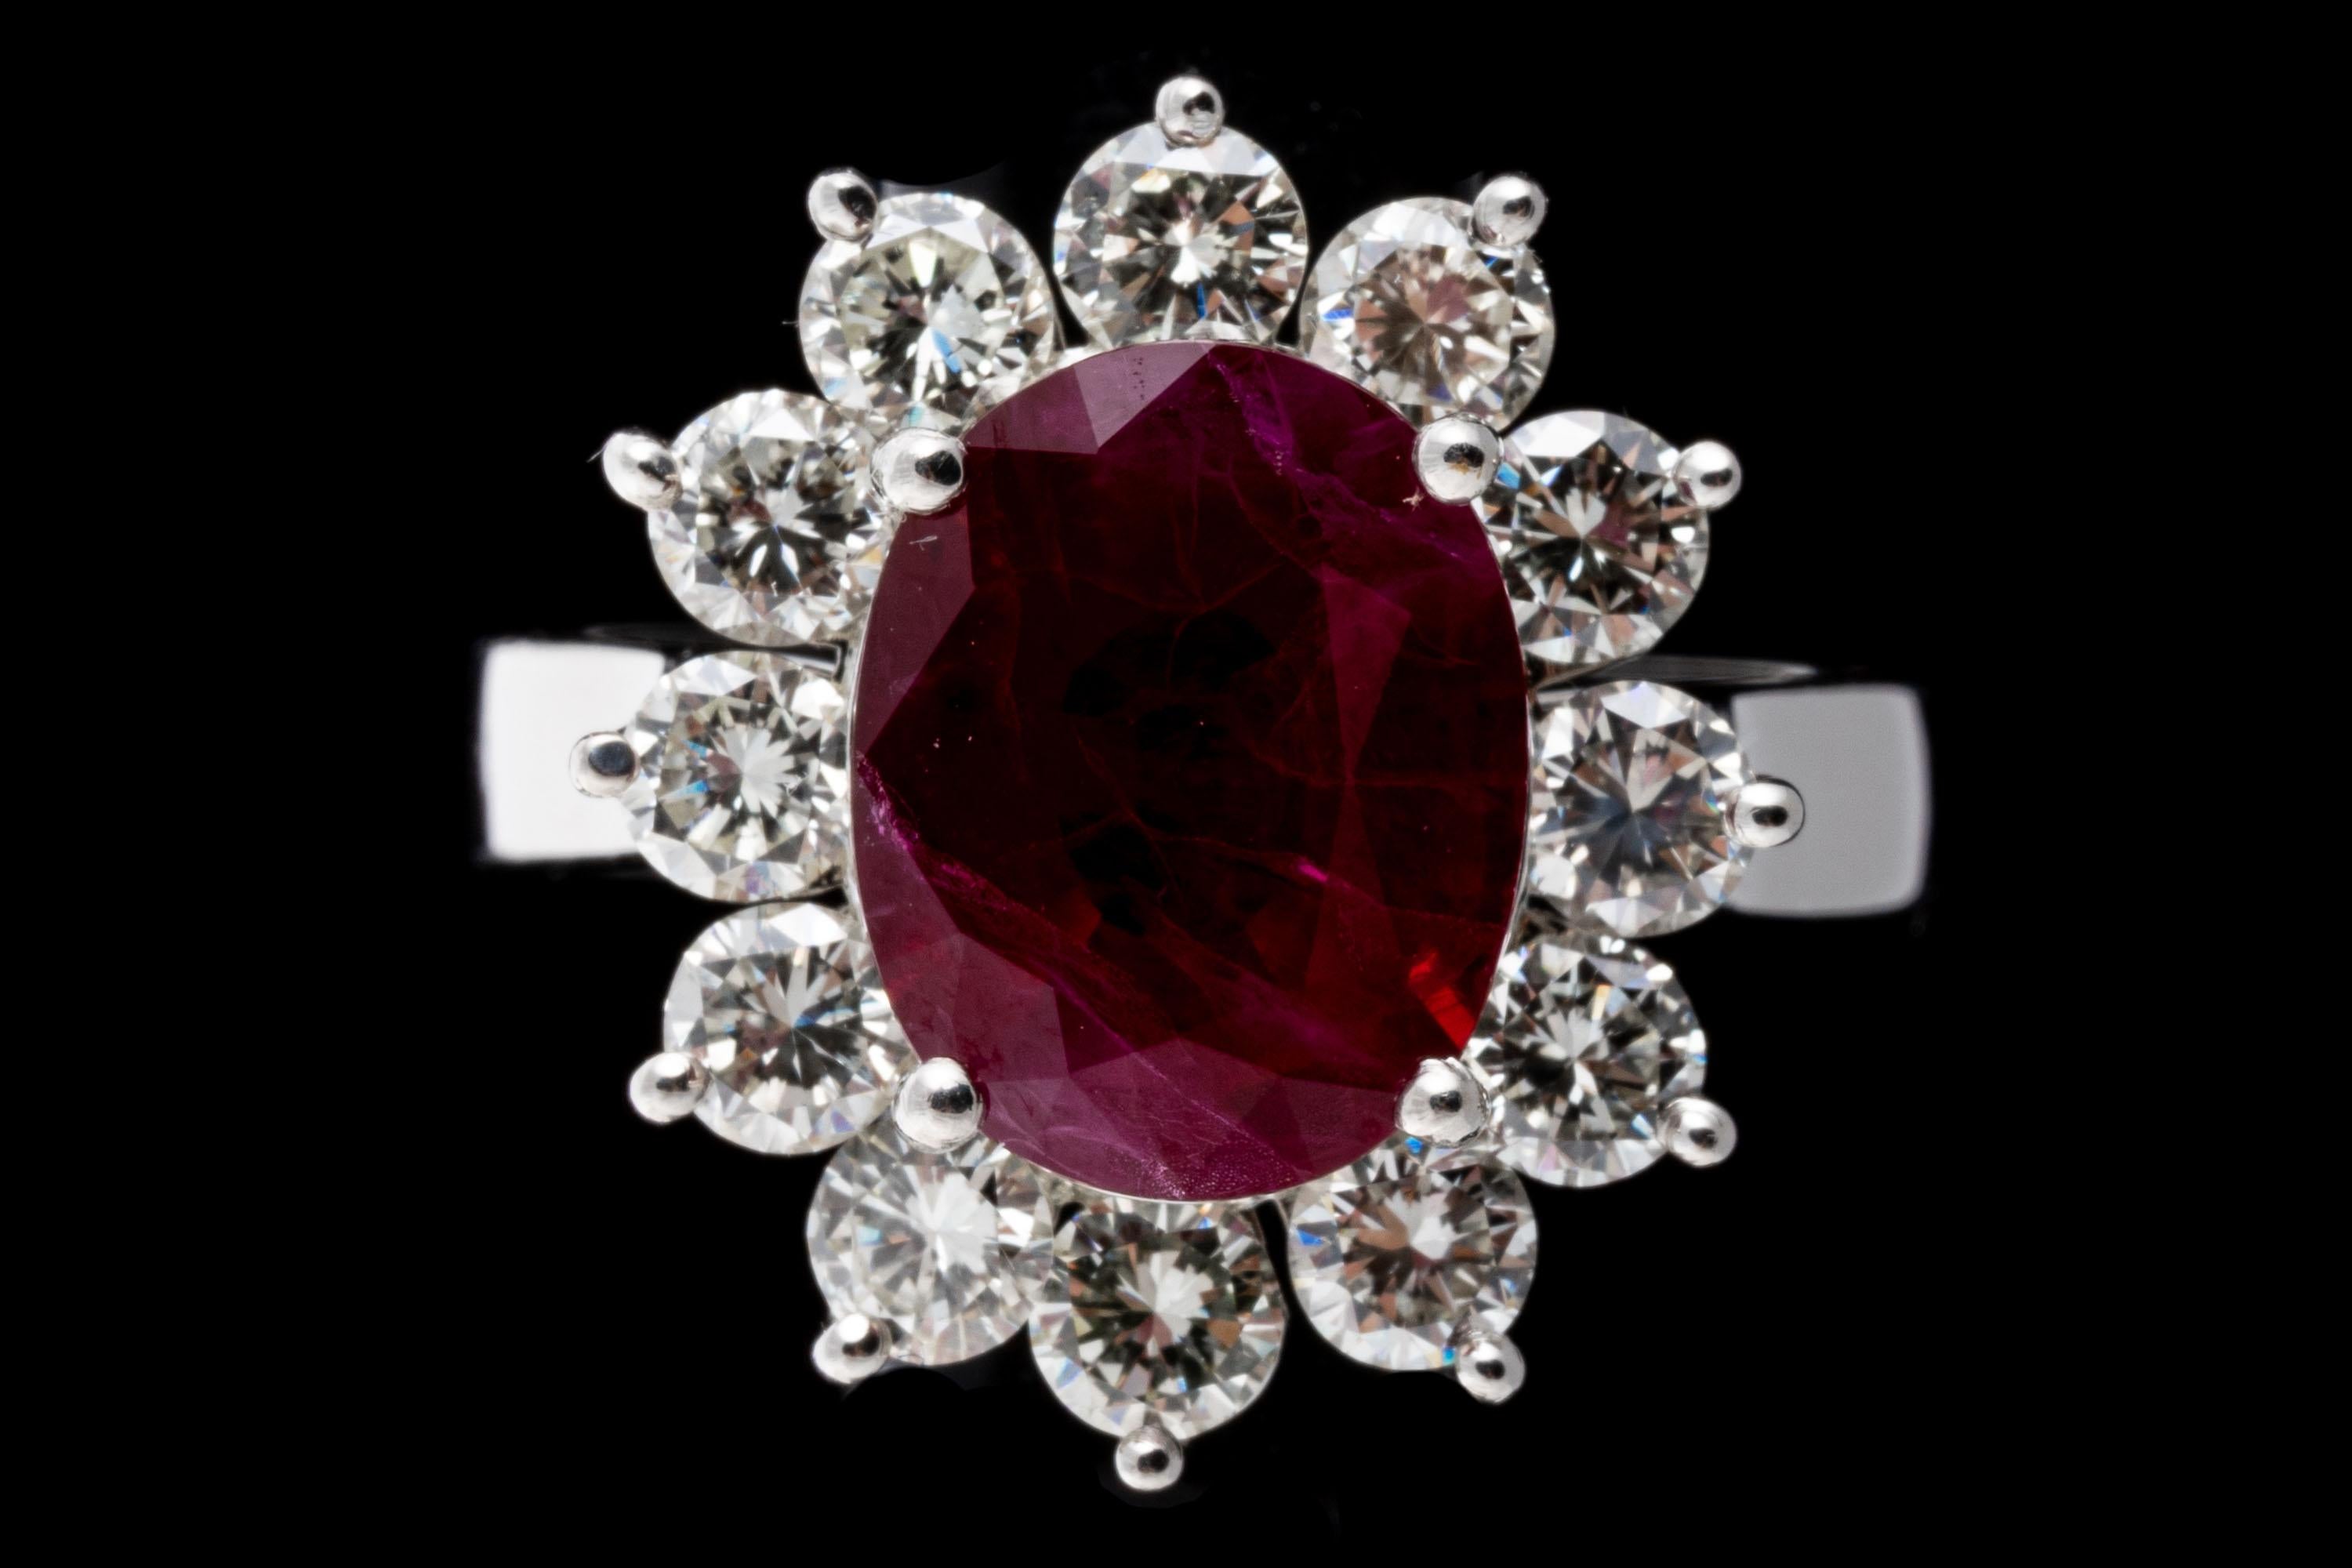 Platinum ring. This gorgeous ring is a Lady Di style, with a faceted oval shape, medium red color ruby center stone, prong set, and approximately 2.82 CTS. Surrounding the stone is a halo of large round brilliant cut diamonds, approximately 0.96